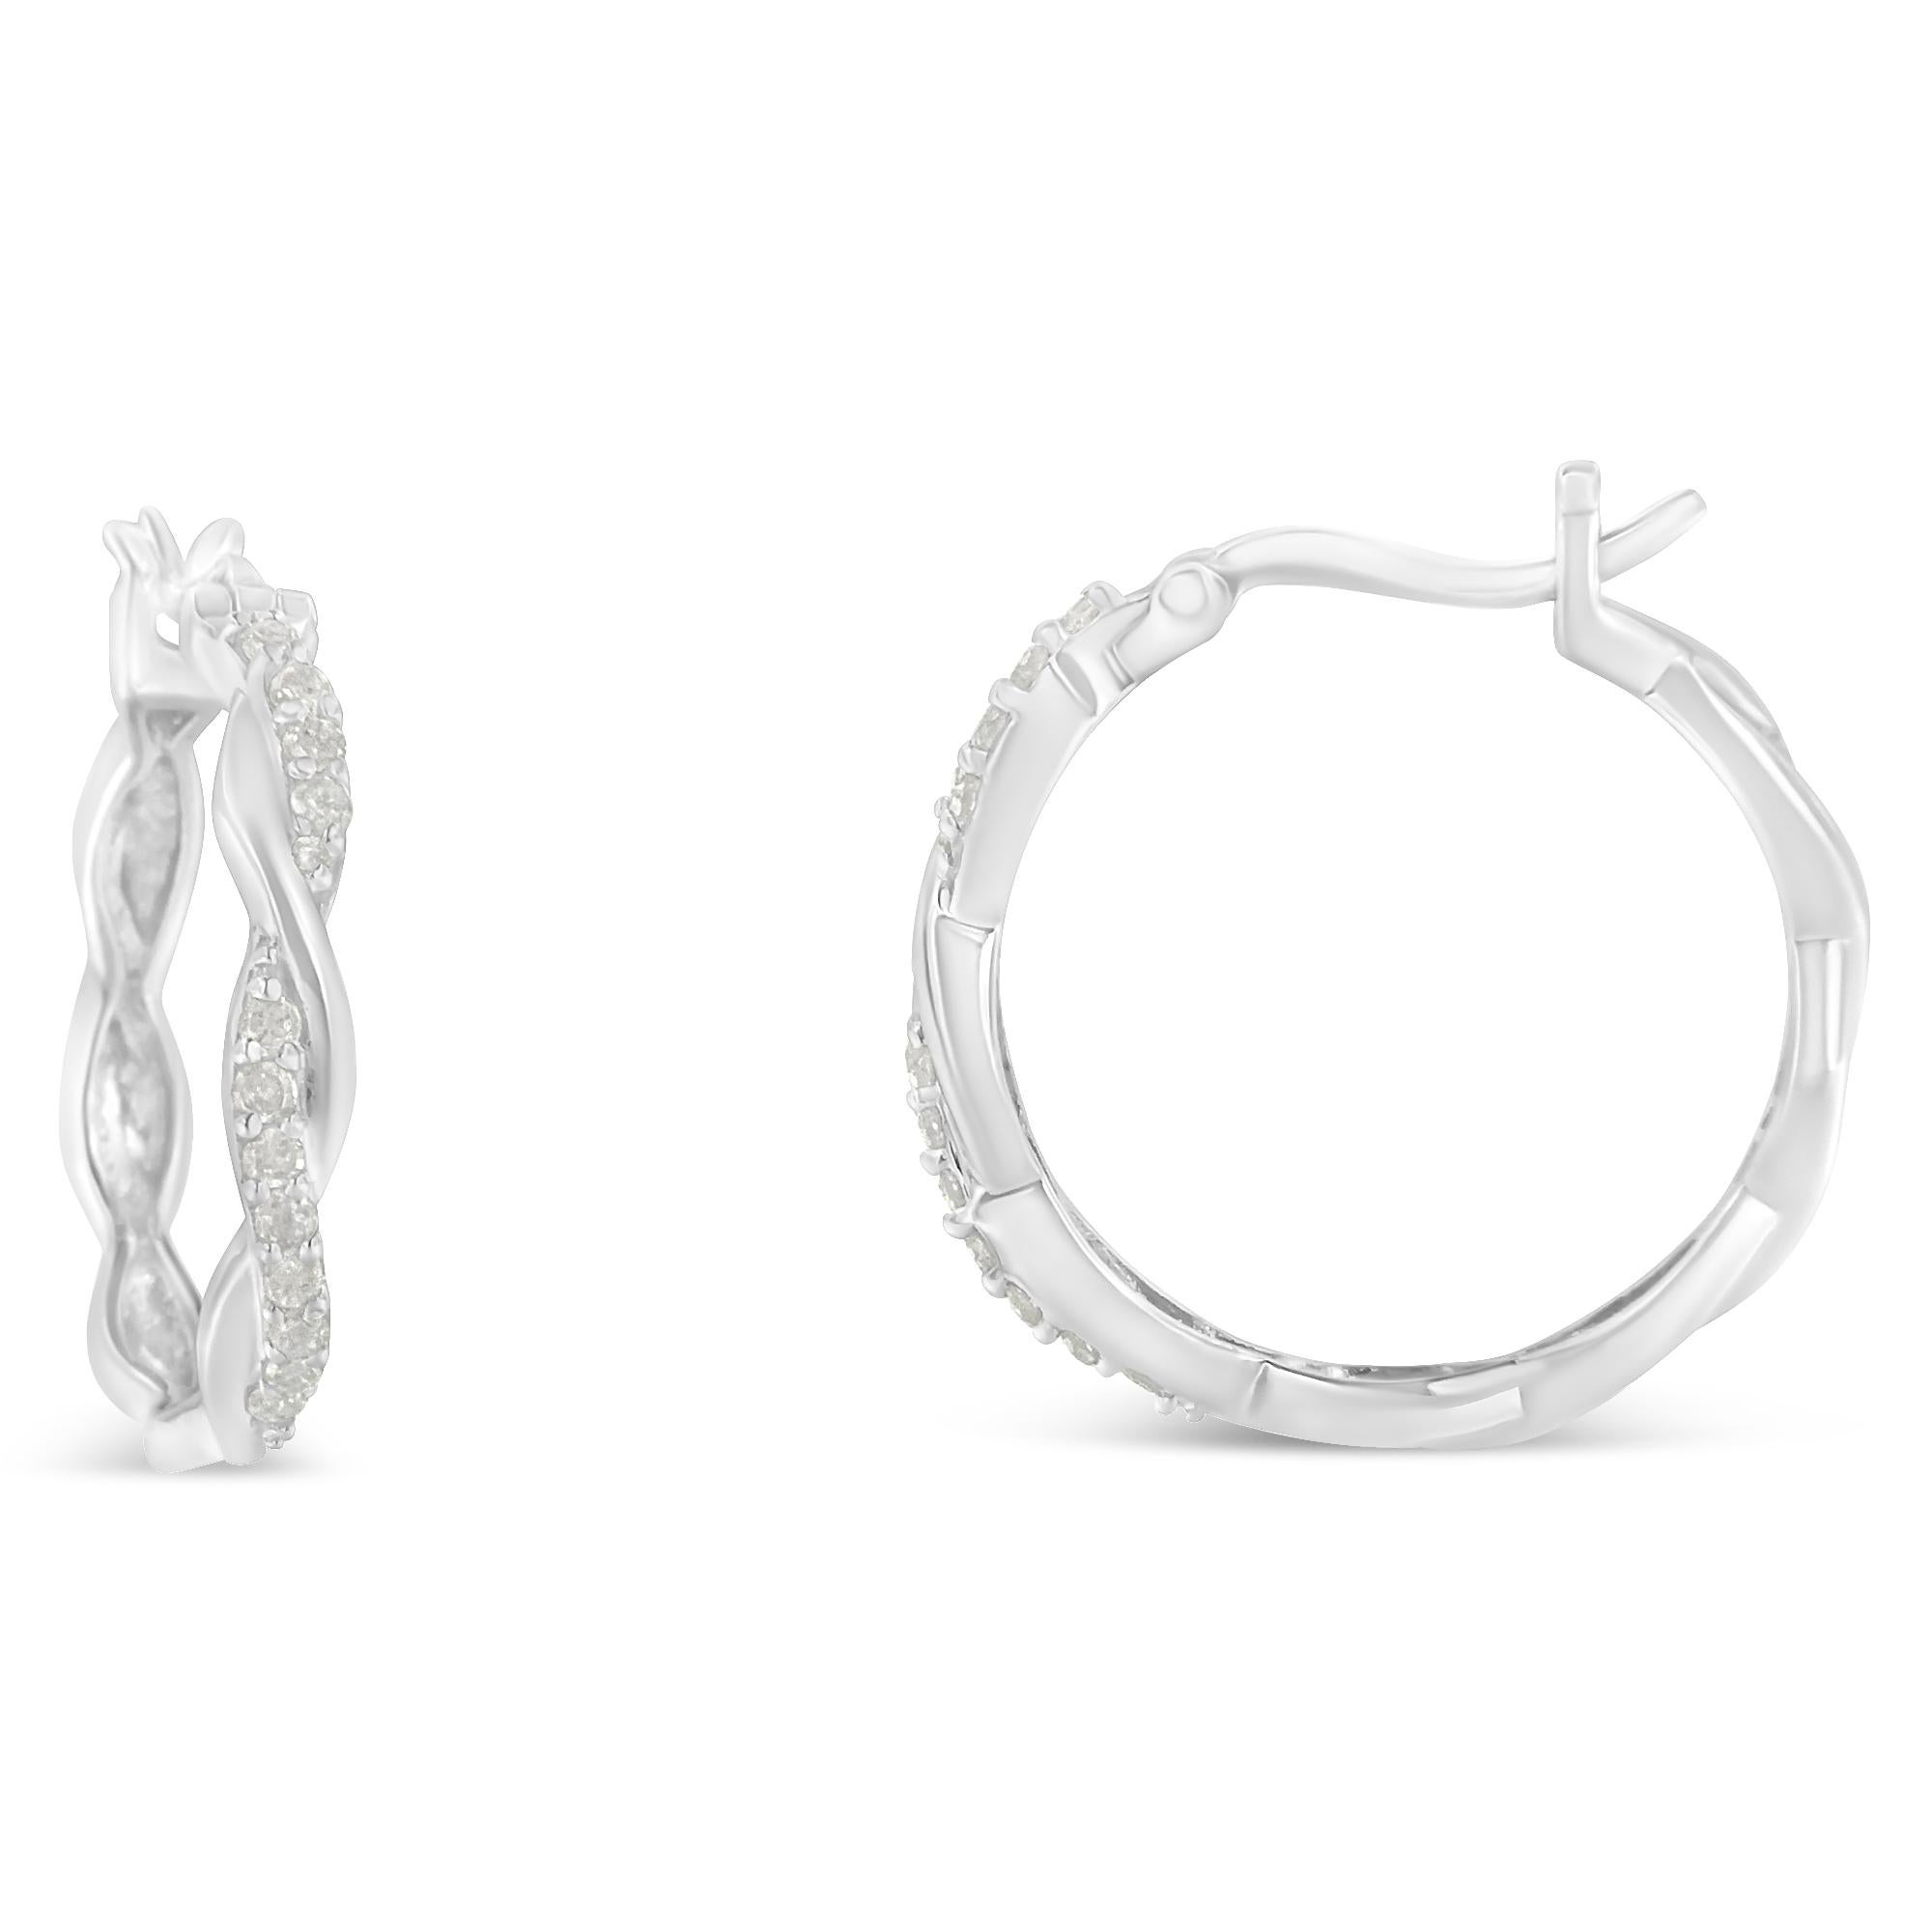 Sophisticated twisted hoop earrings made with the finest .925 sterling silver and genuine diamonds. These white plated colored earrings include 24 rose-cut shaped diamonds in a pave setting. The diamonds are craved in a layer that interlaces with